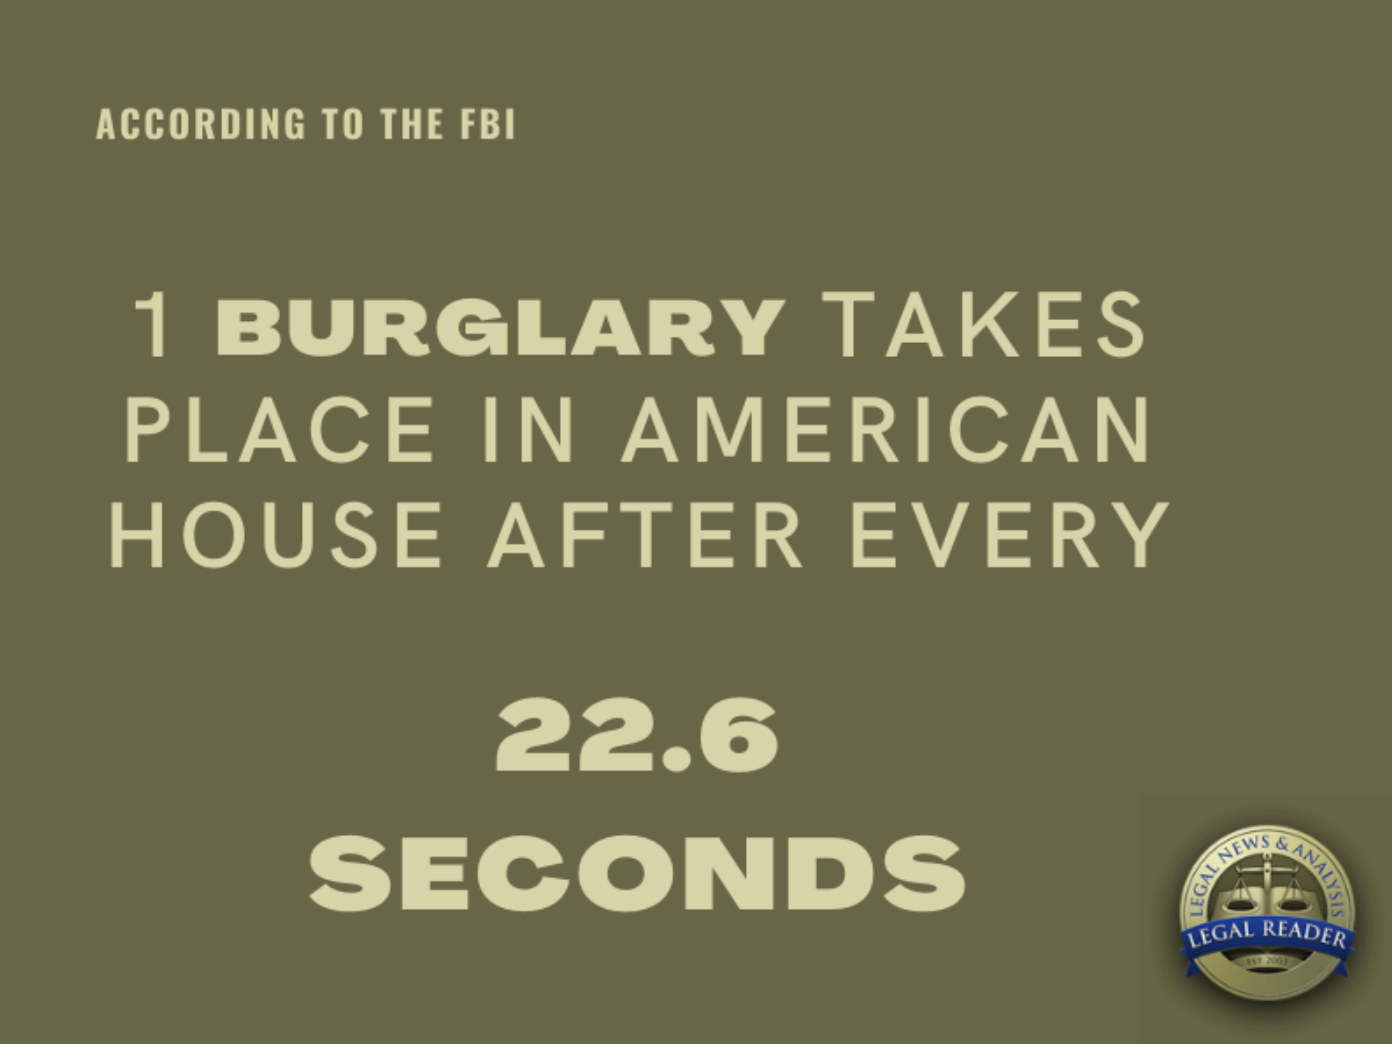 One burglary in the US every 22.6 seconds; source of statistic: